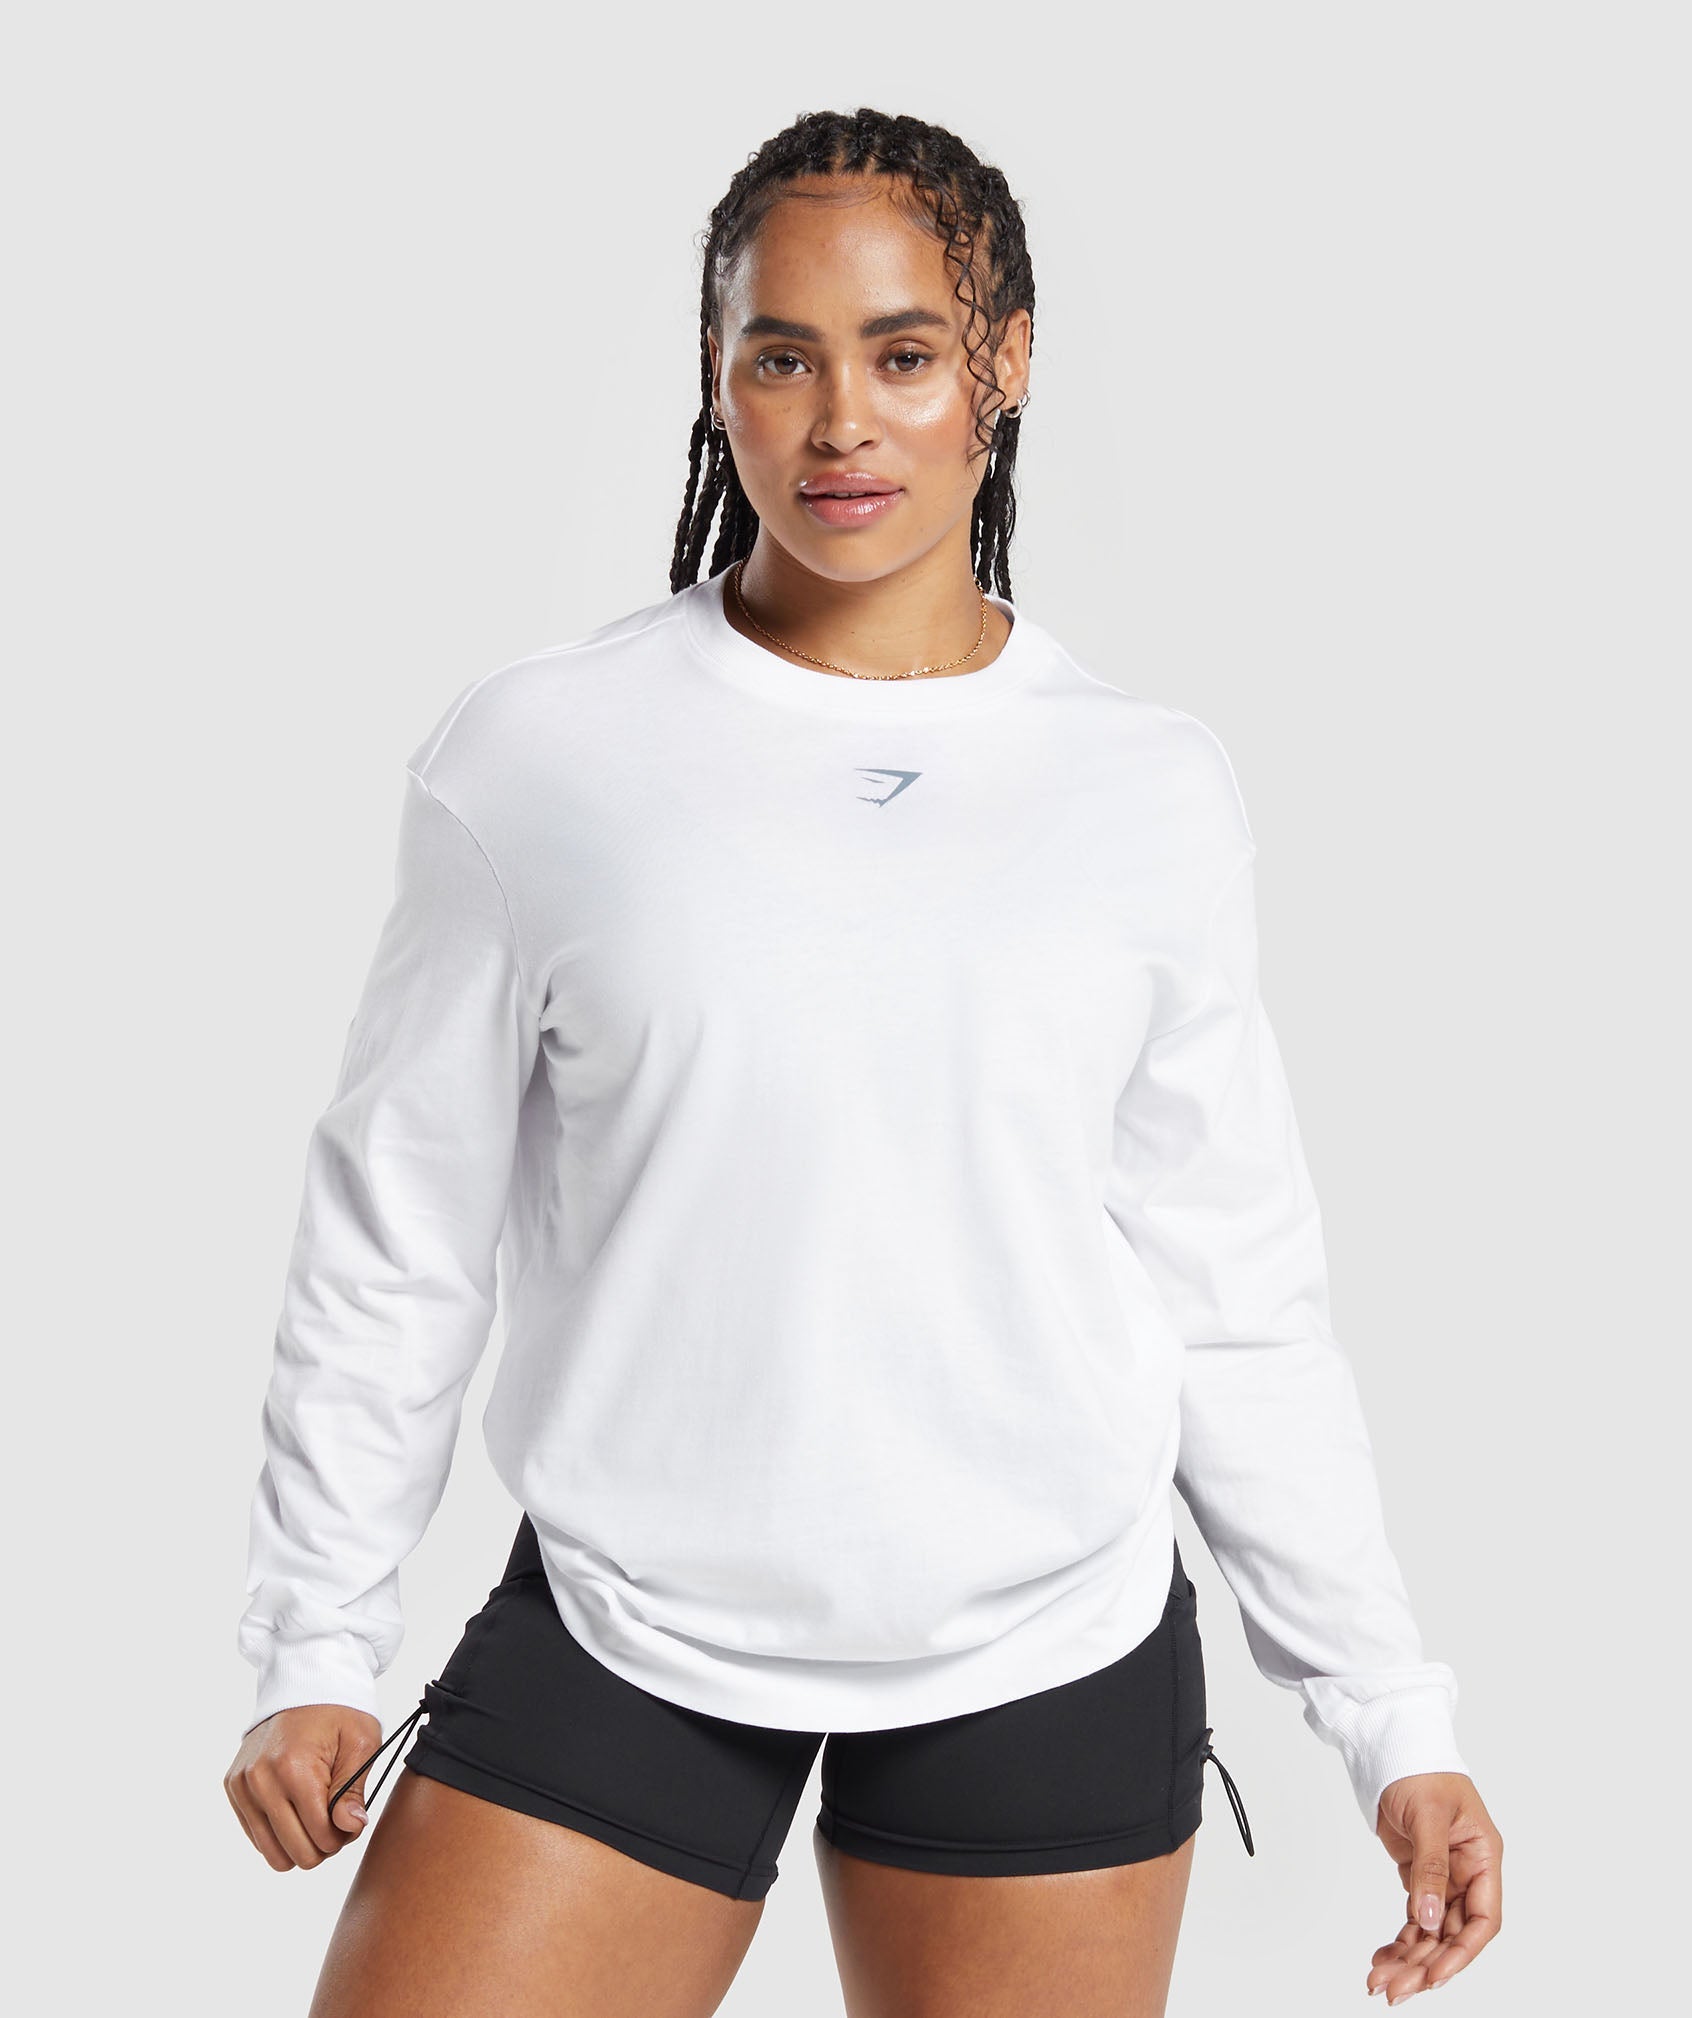 Weightlifting Long Sleeve Top in White - view 2